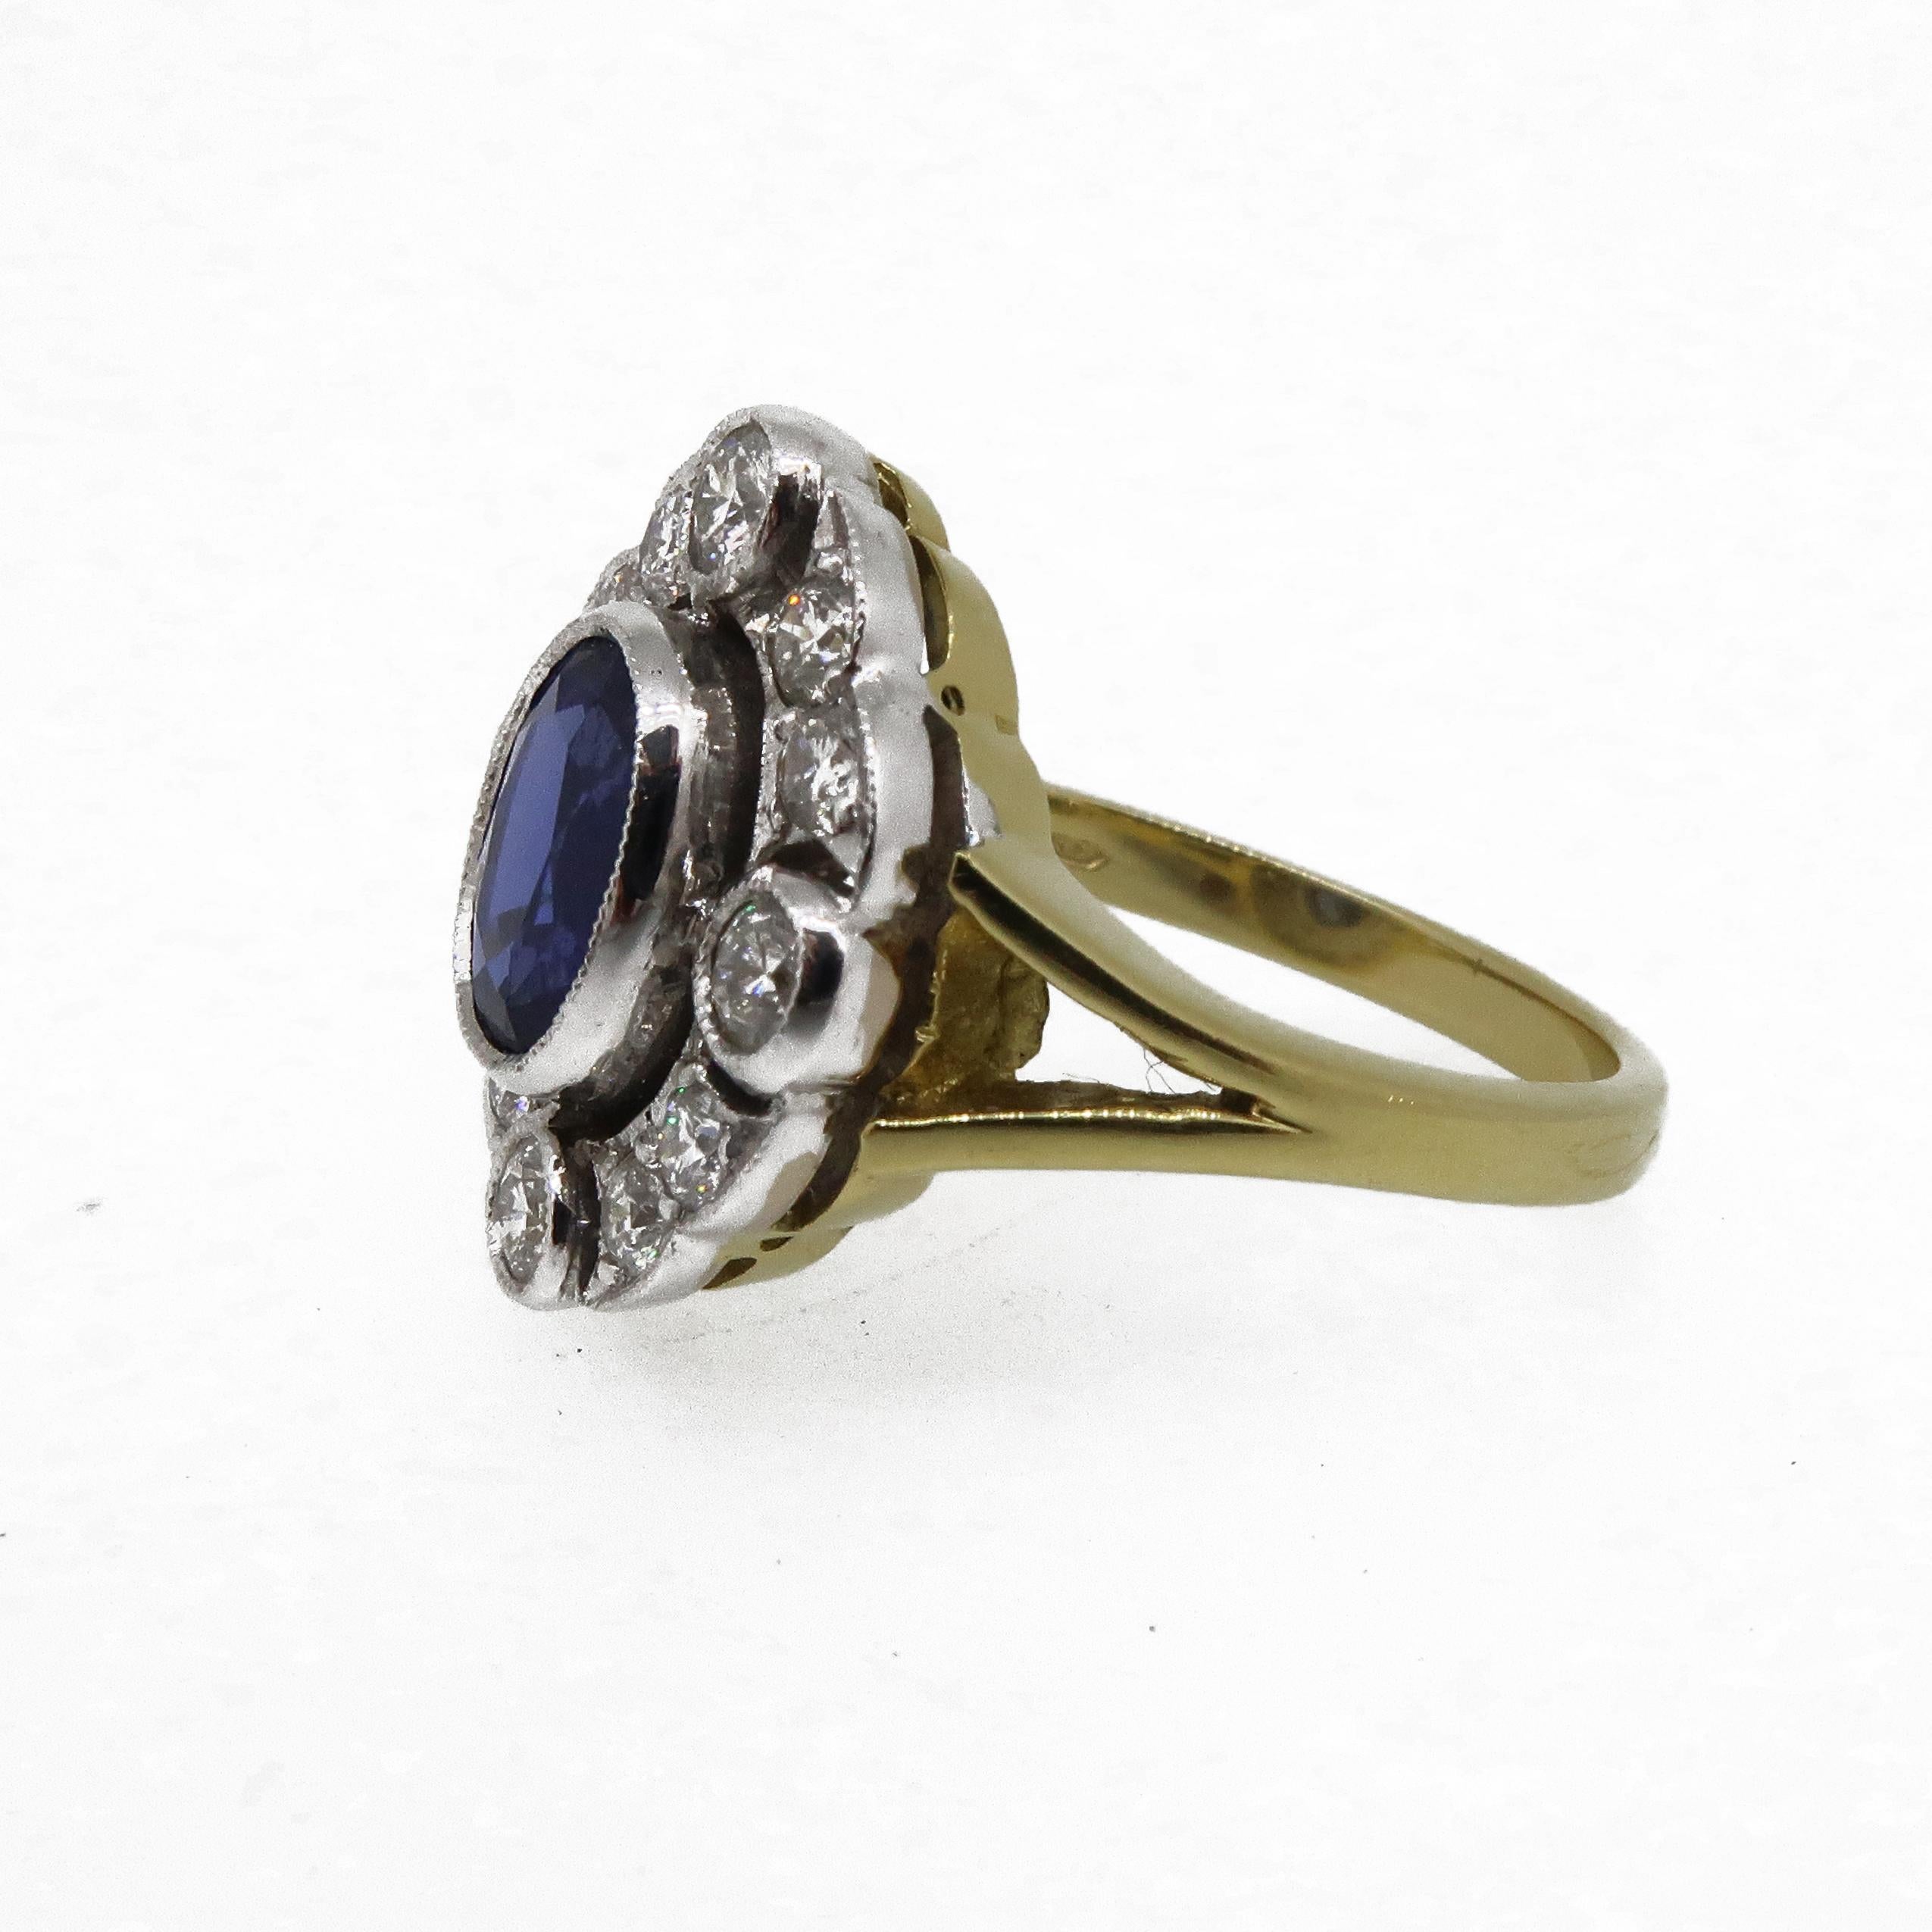 18 Karat Gold Oval Sapphire & Diamond Art Deco Style Cocktail Cluster Ring

A rich royal blue oval sapphire ring. The central sapphire is encased in a delicate white gold millgrain bezel, surrounded by an open framework of brilliant cut diamonds